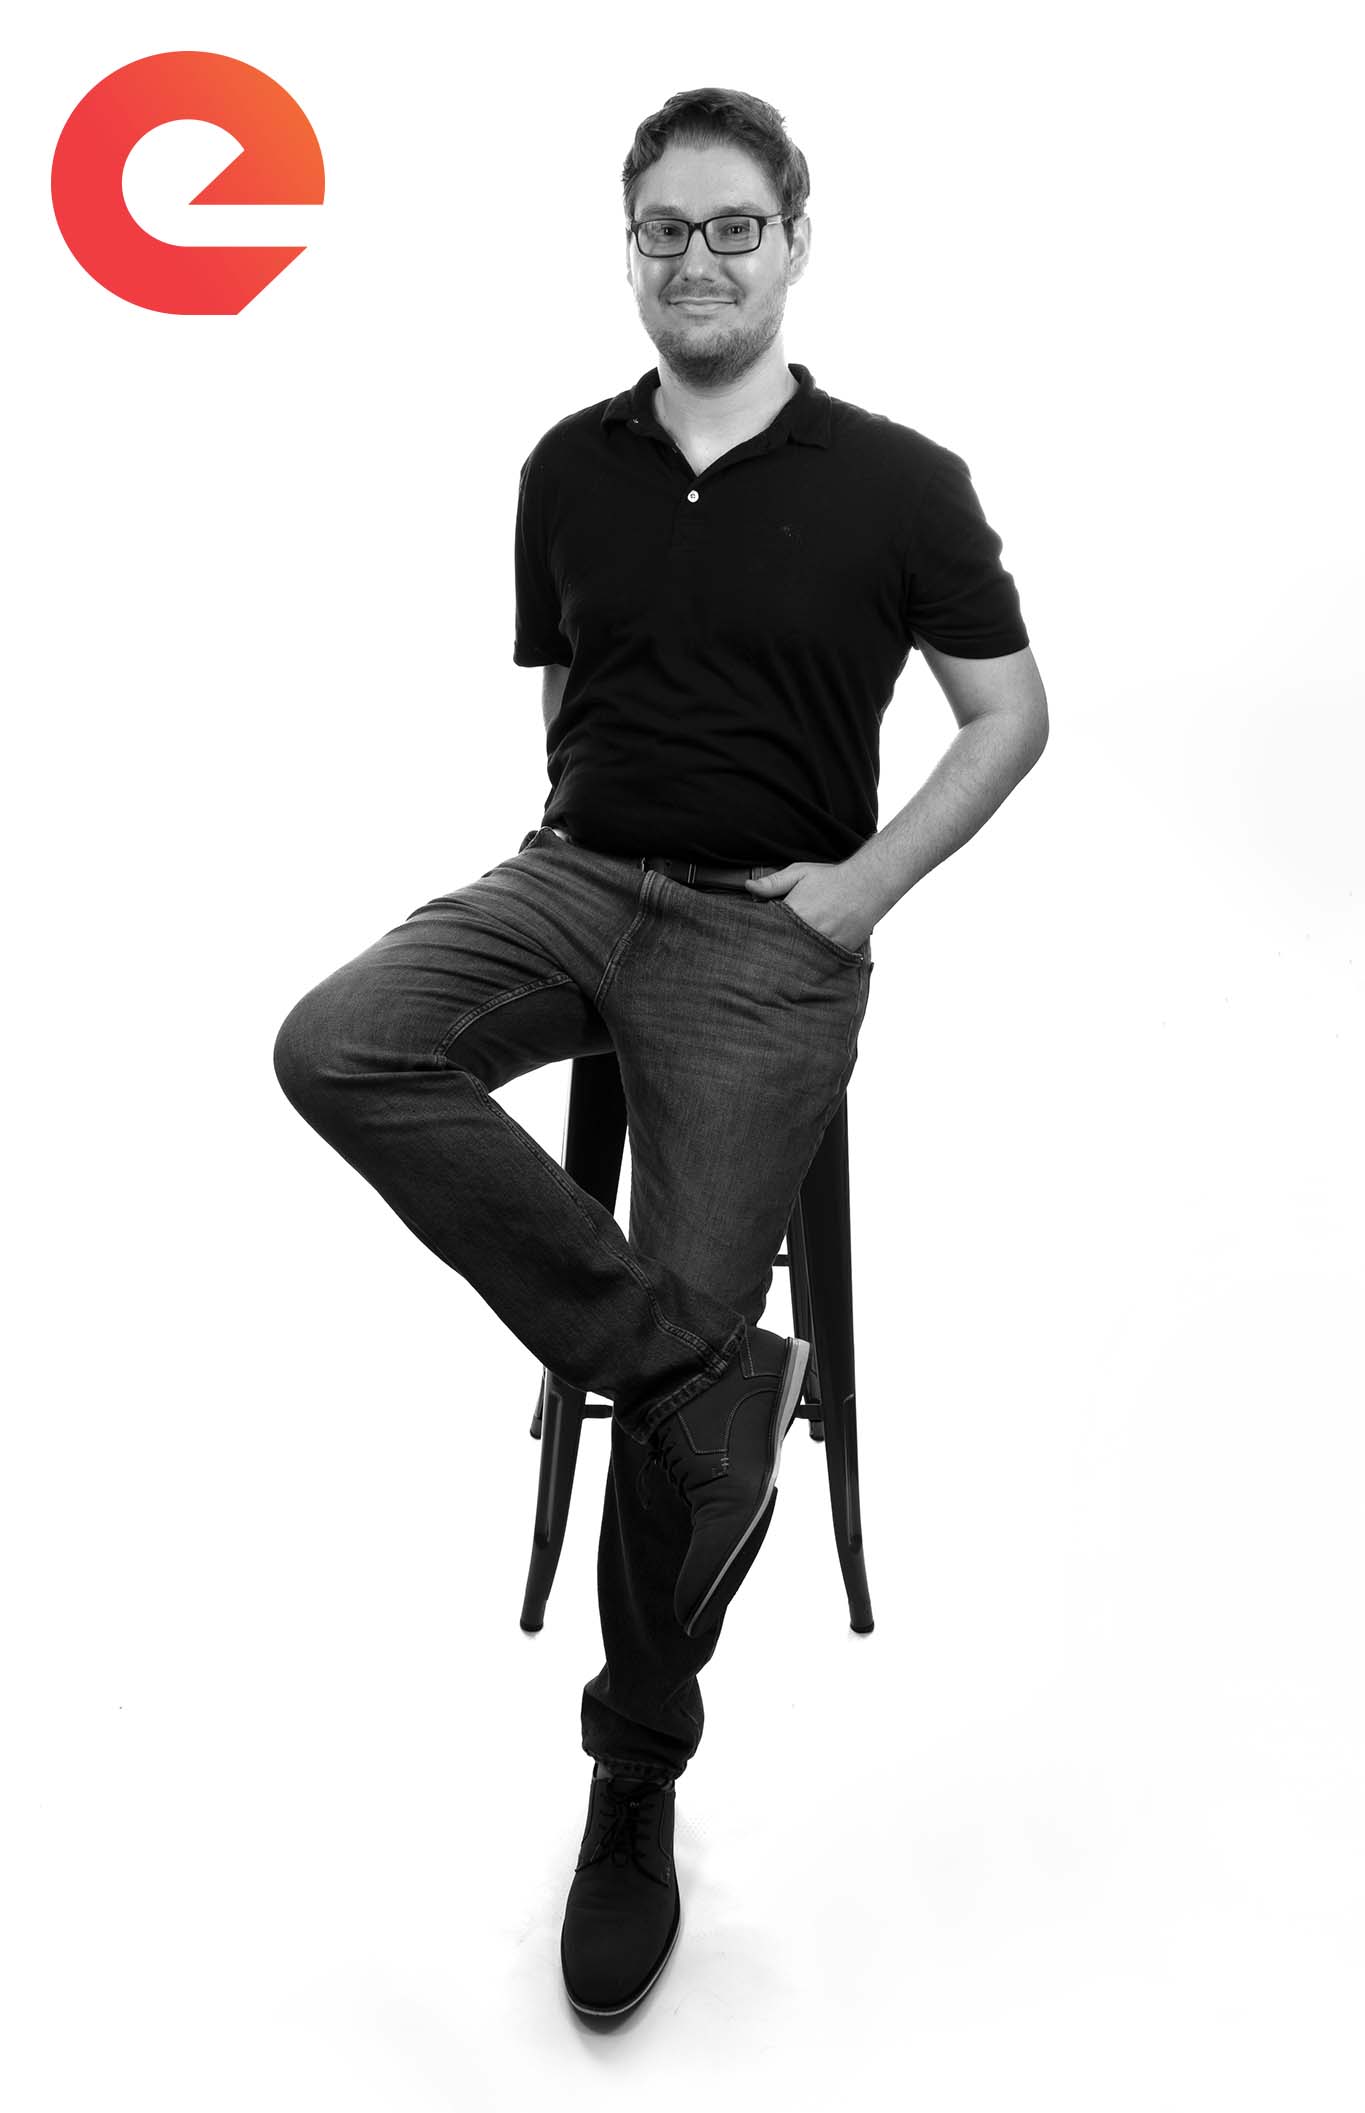 Josh Loufek | Web developer. Black and white photo. White male with black rimmed glasses, shorter tousled dark brown hair, slight facial hair, black polo, dark jeans, black shoes. Leaning casually against a black stool, right leg slightly crossed with the ankle resting on the left knee. Left hand in the pocket. White background.